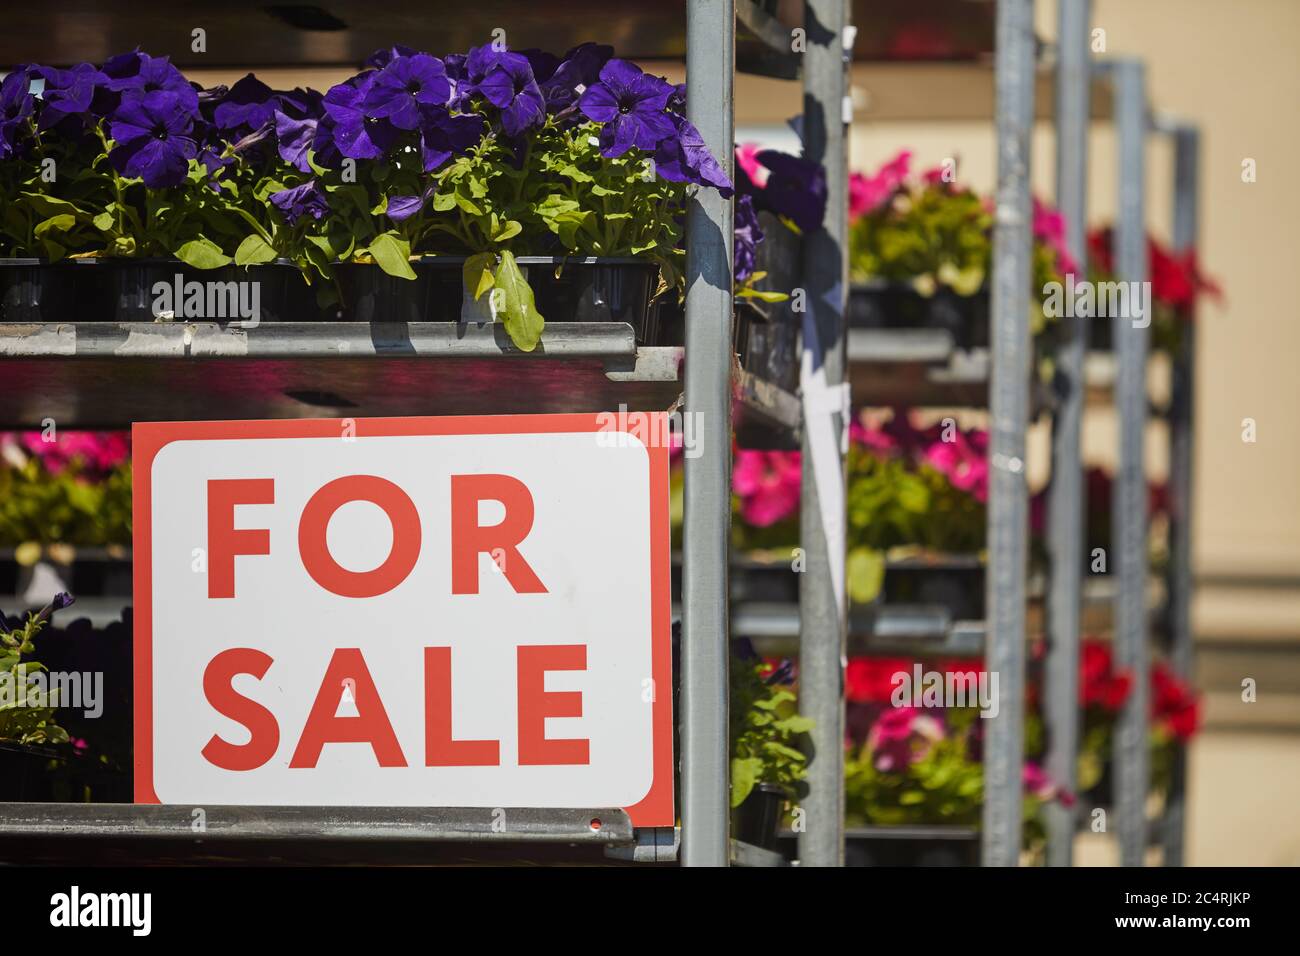 Background image of potted flowers stacked on shelves in plantation with red FOR SALE sign, copy space Stock Photo